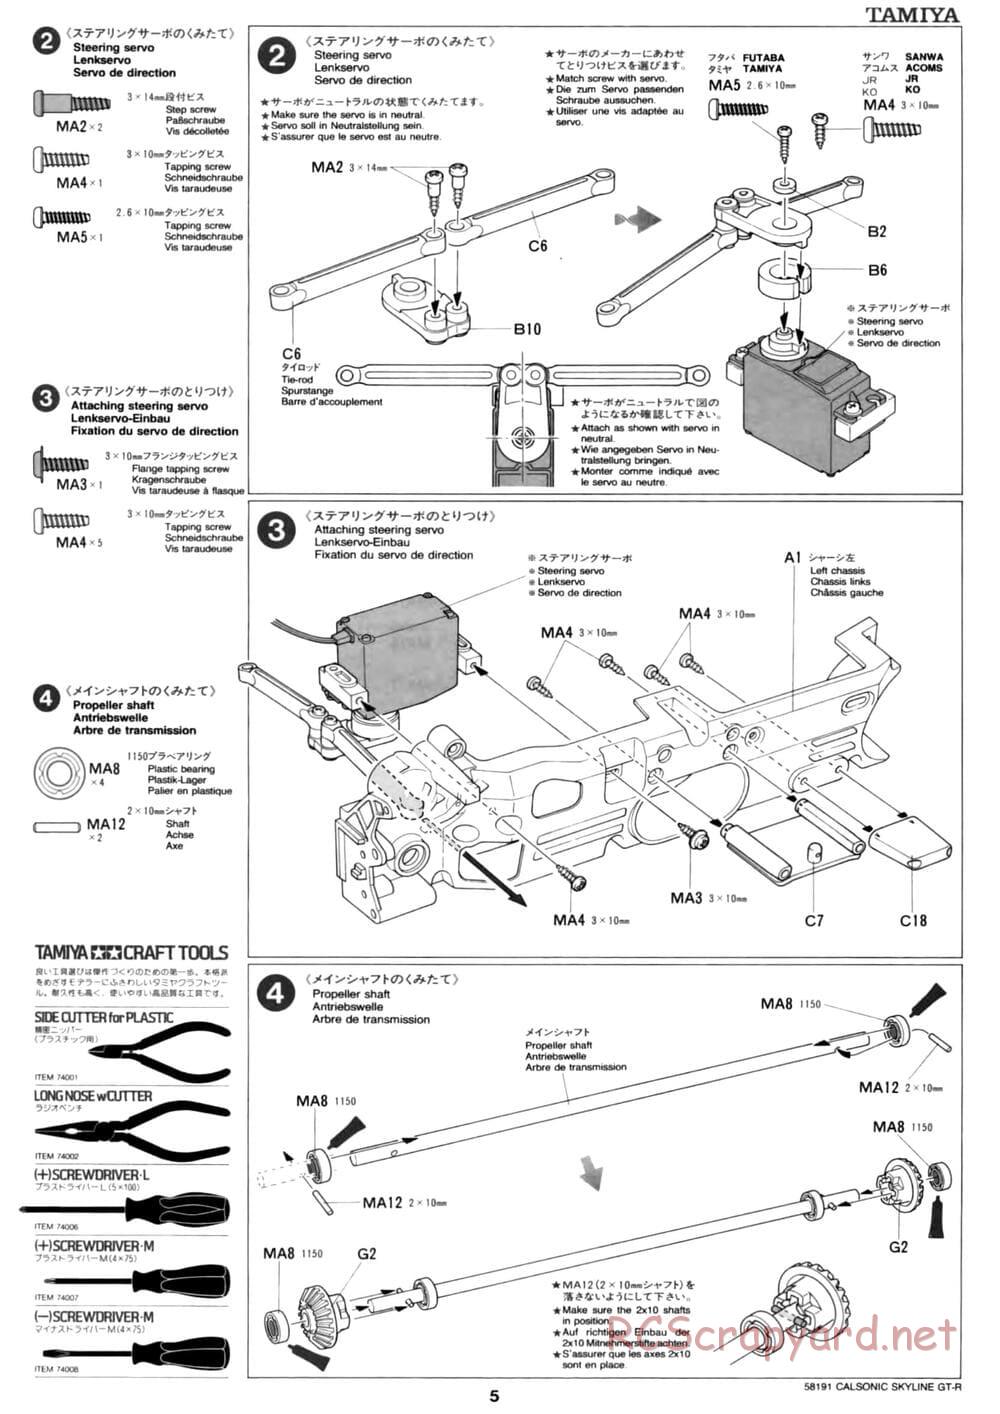 Tamiya - Calsonic Skyline GT-R - TL-01 Chassis - Manual - Page 5